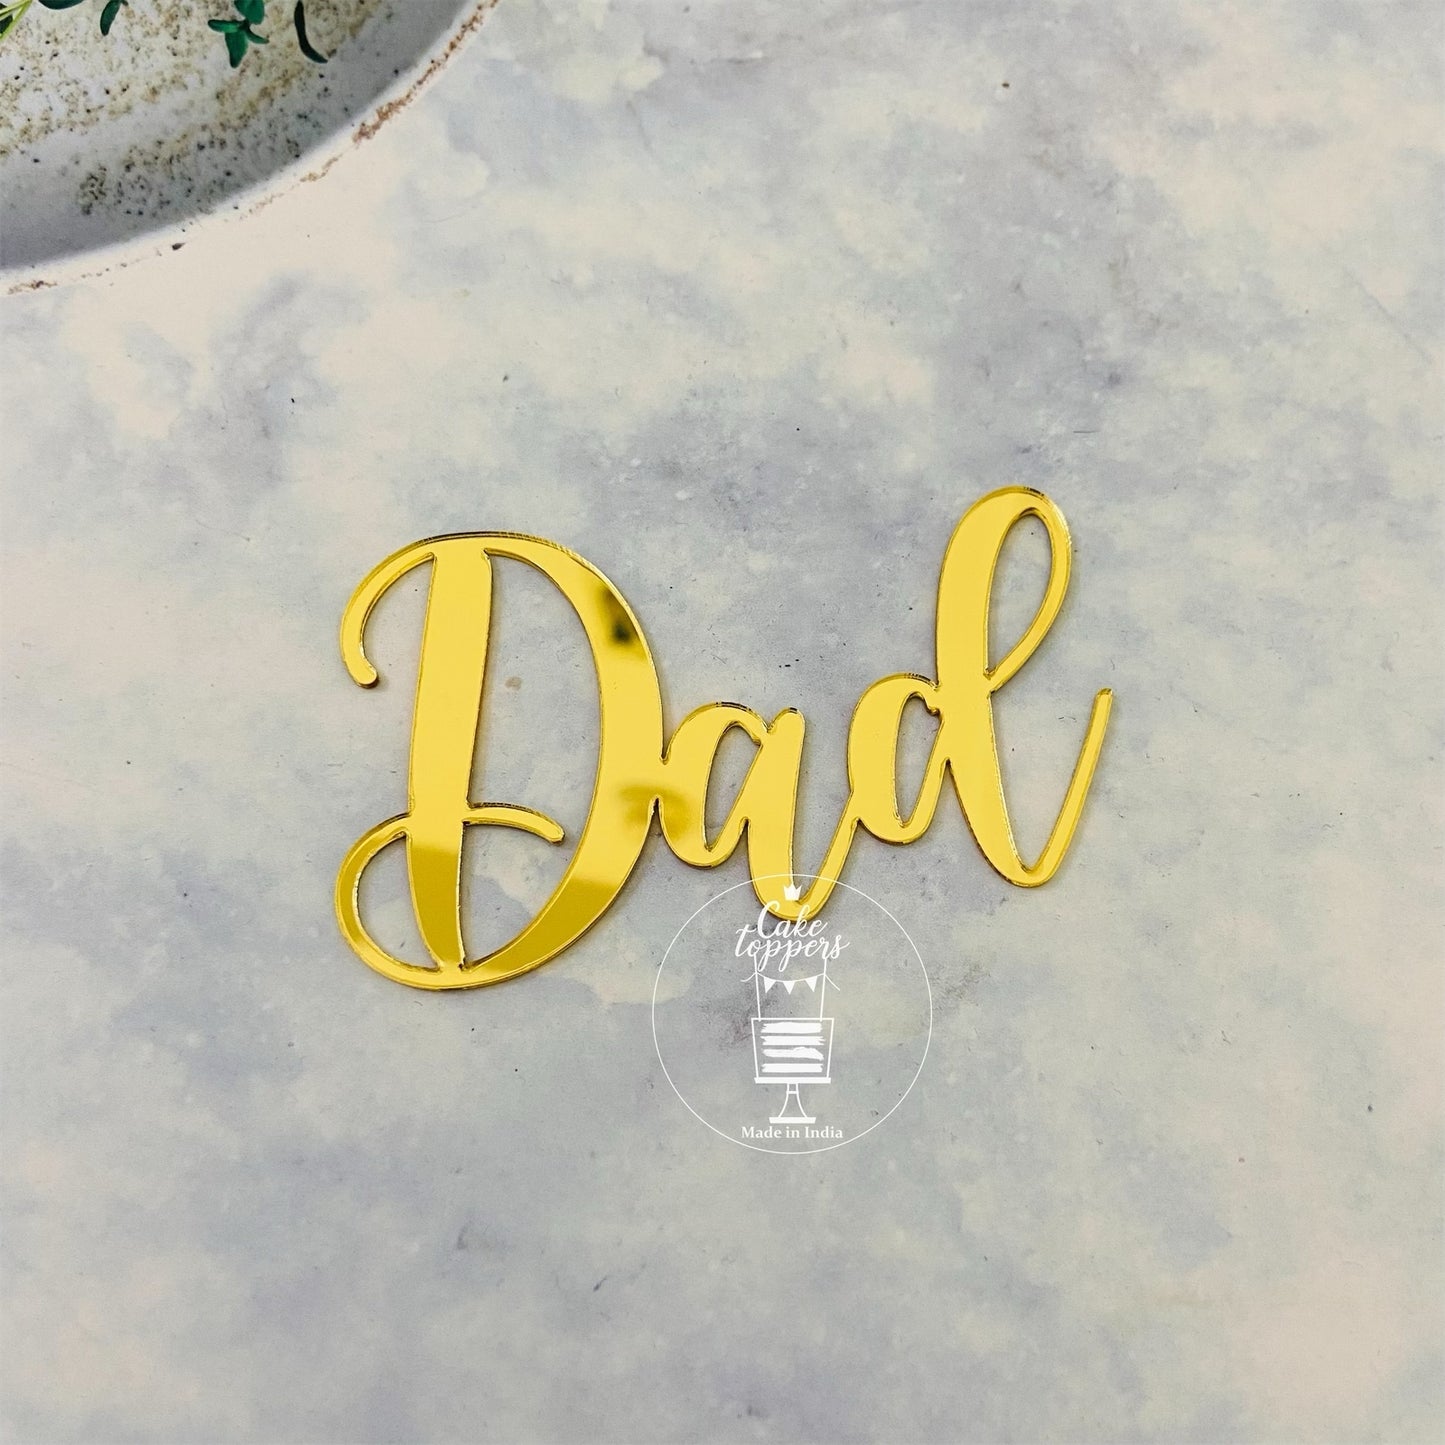 Dad Topper / Dad Cutout / Father's Day Topper